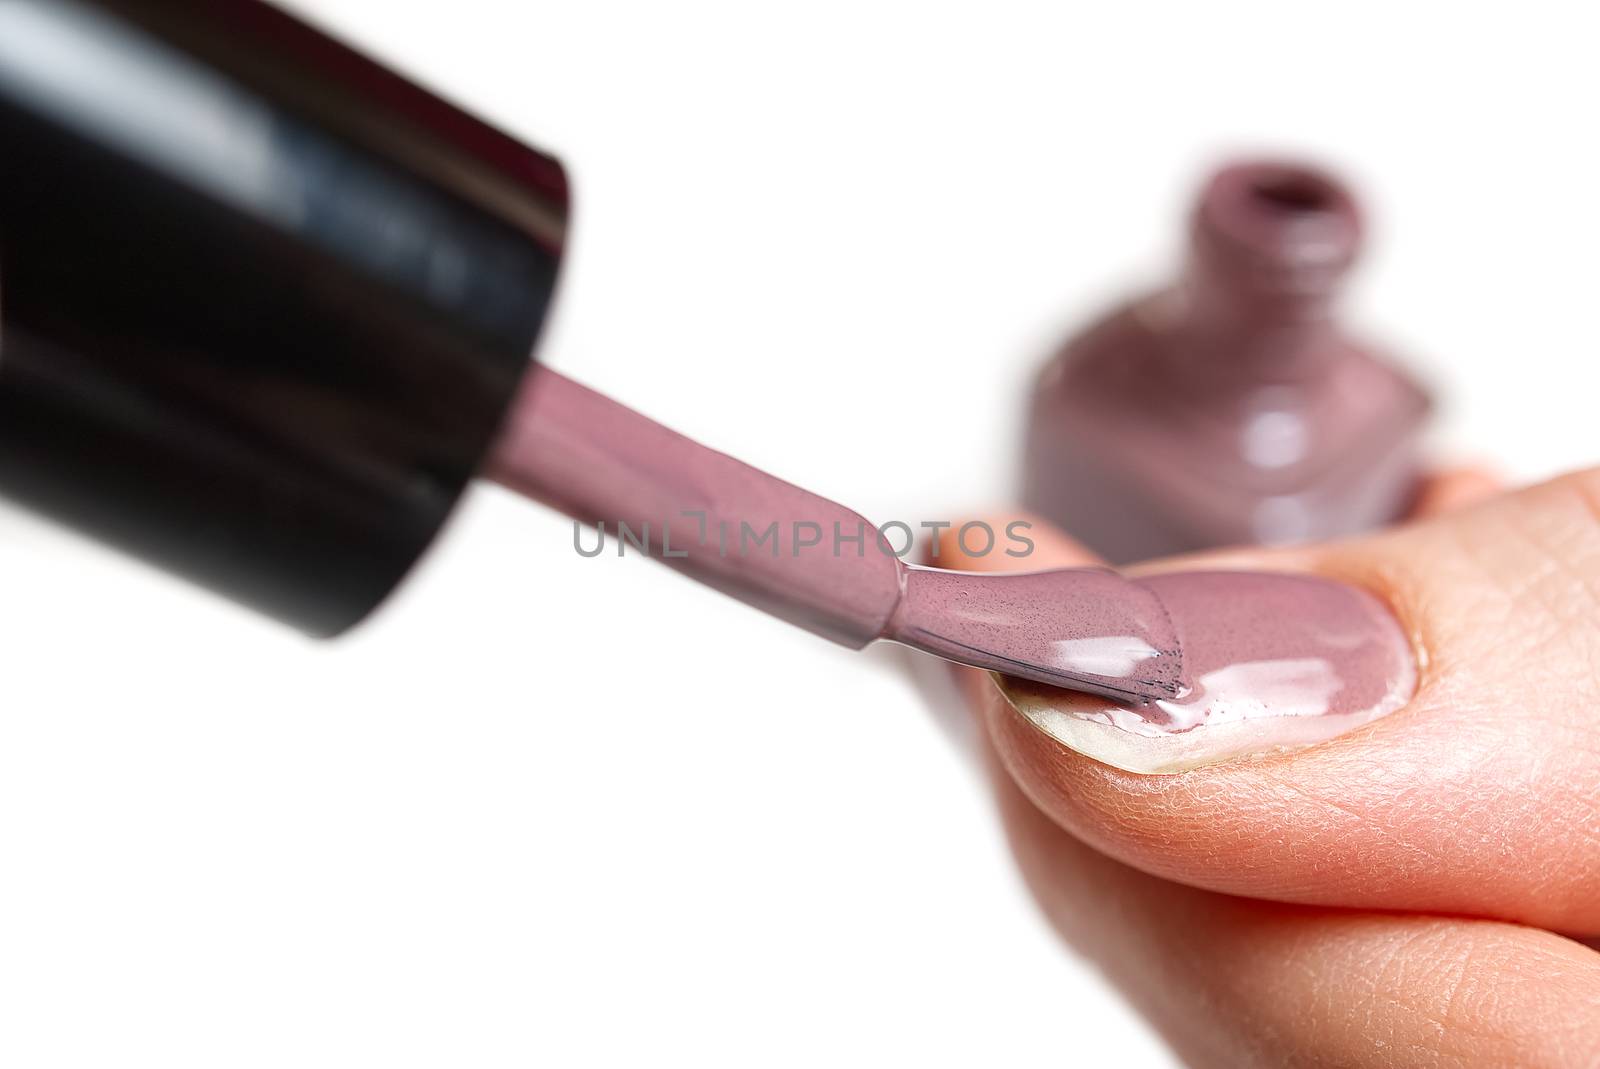 Woman applying nail polish. Beautiful nails. Woman applying polish on nails at home. Pastel nail polish on fingernail. Beauty treatment and hand care concept. manicure procedures yourself at home.